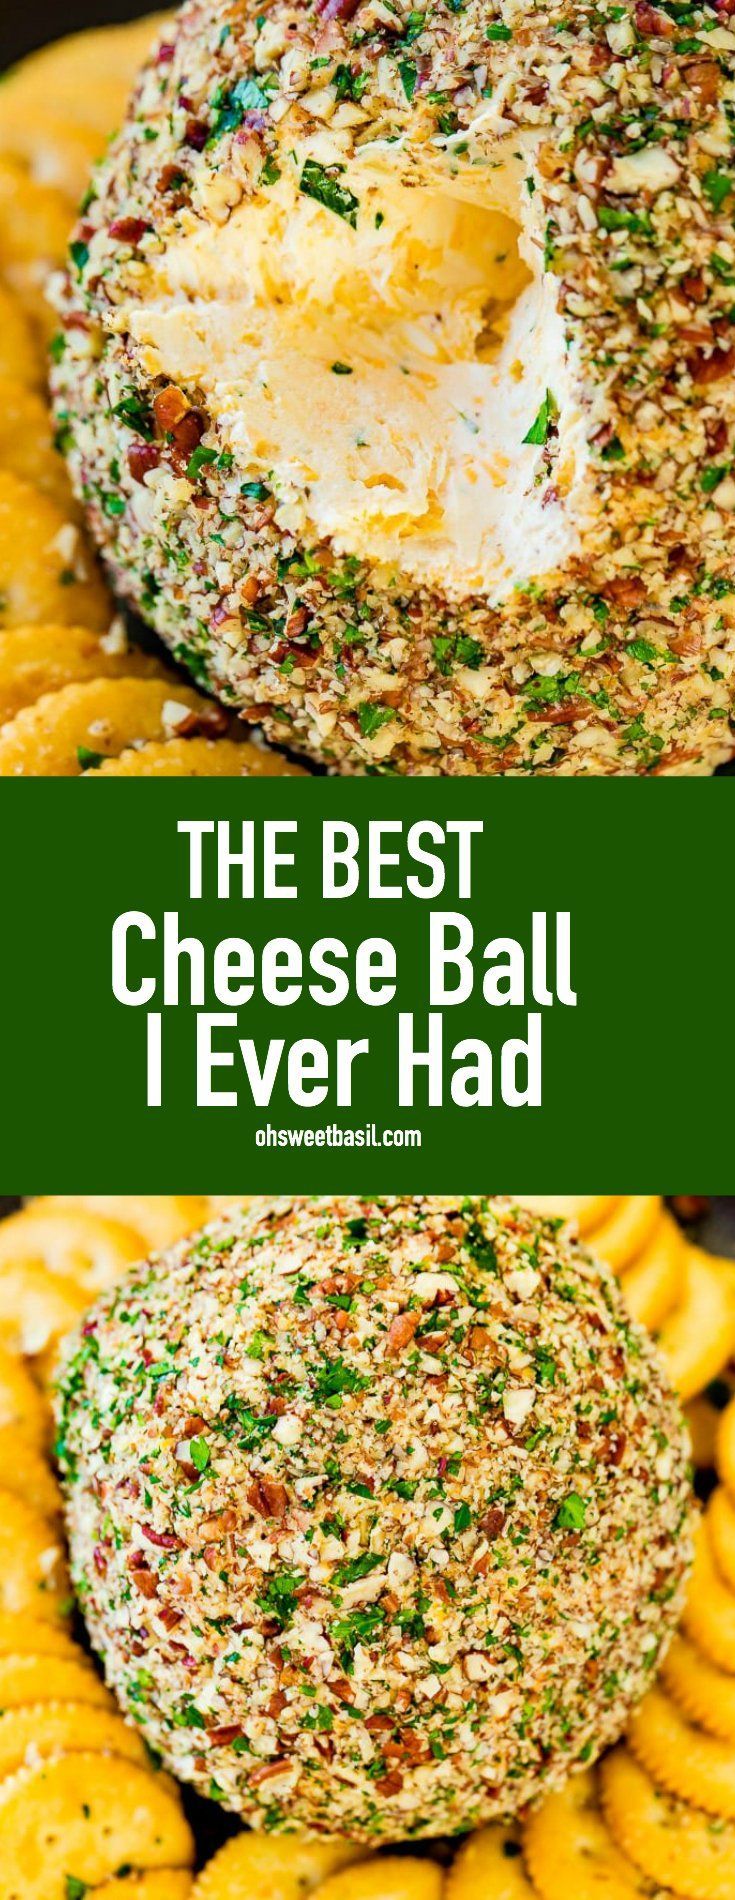 The Best Cheese Ball I Ever Had - Oh Sweet Basil -   19 easy holiday Recipes ideas